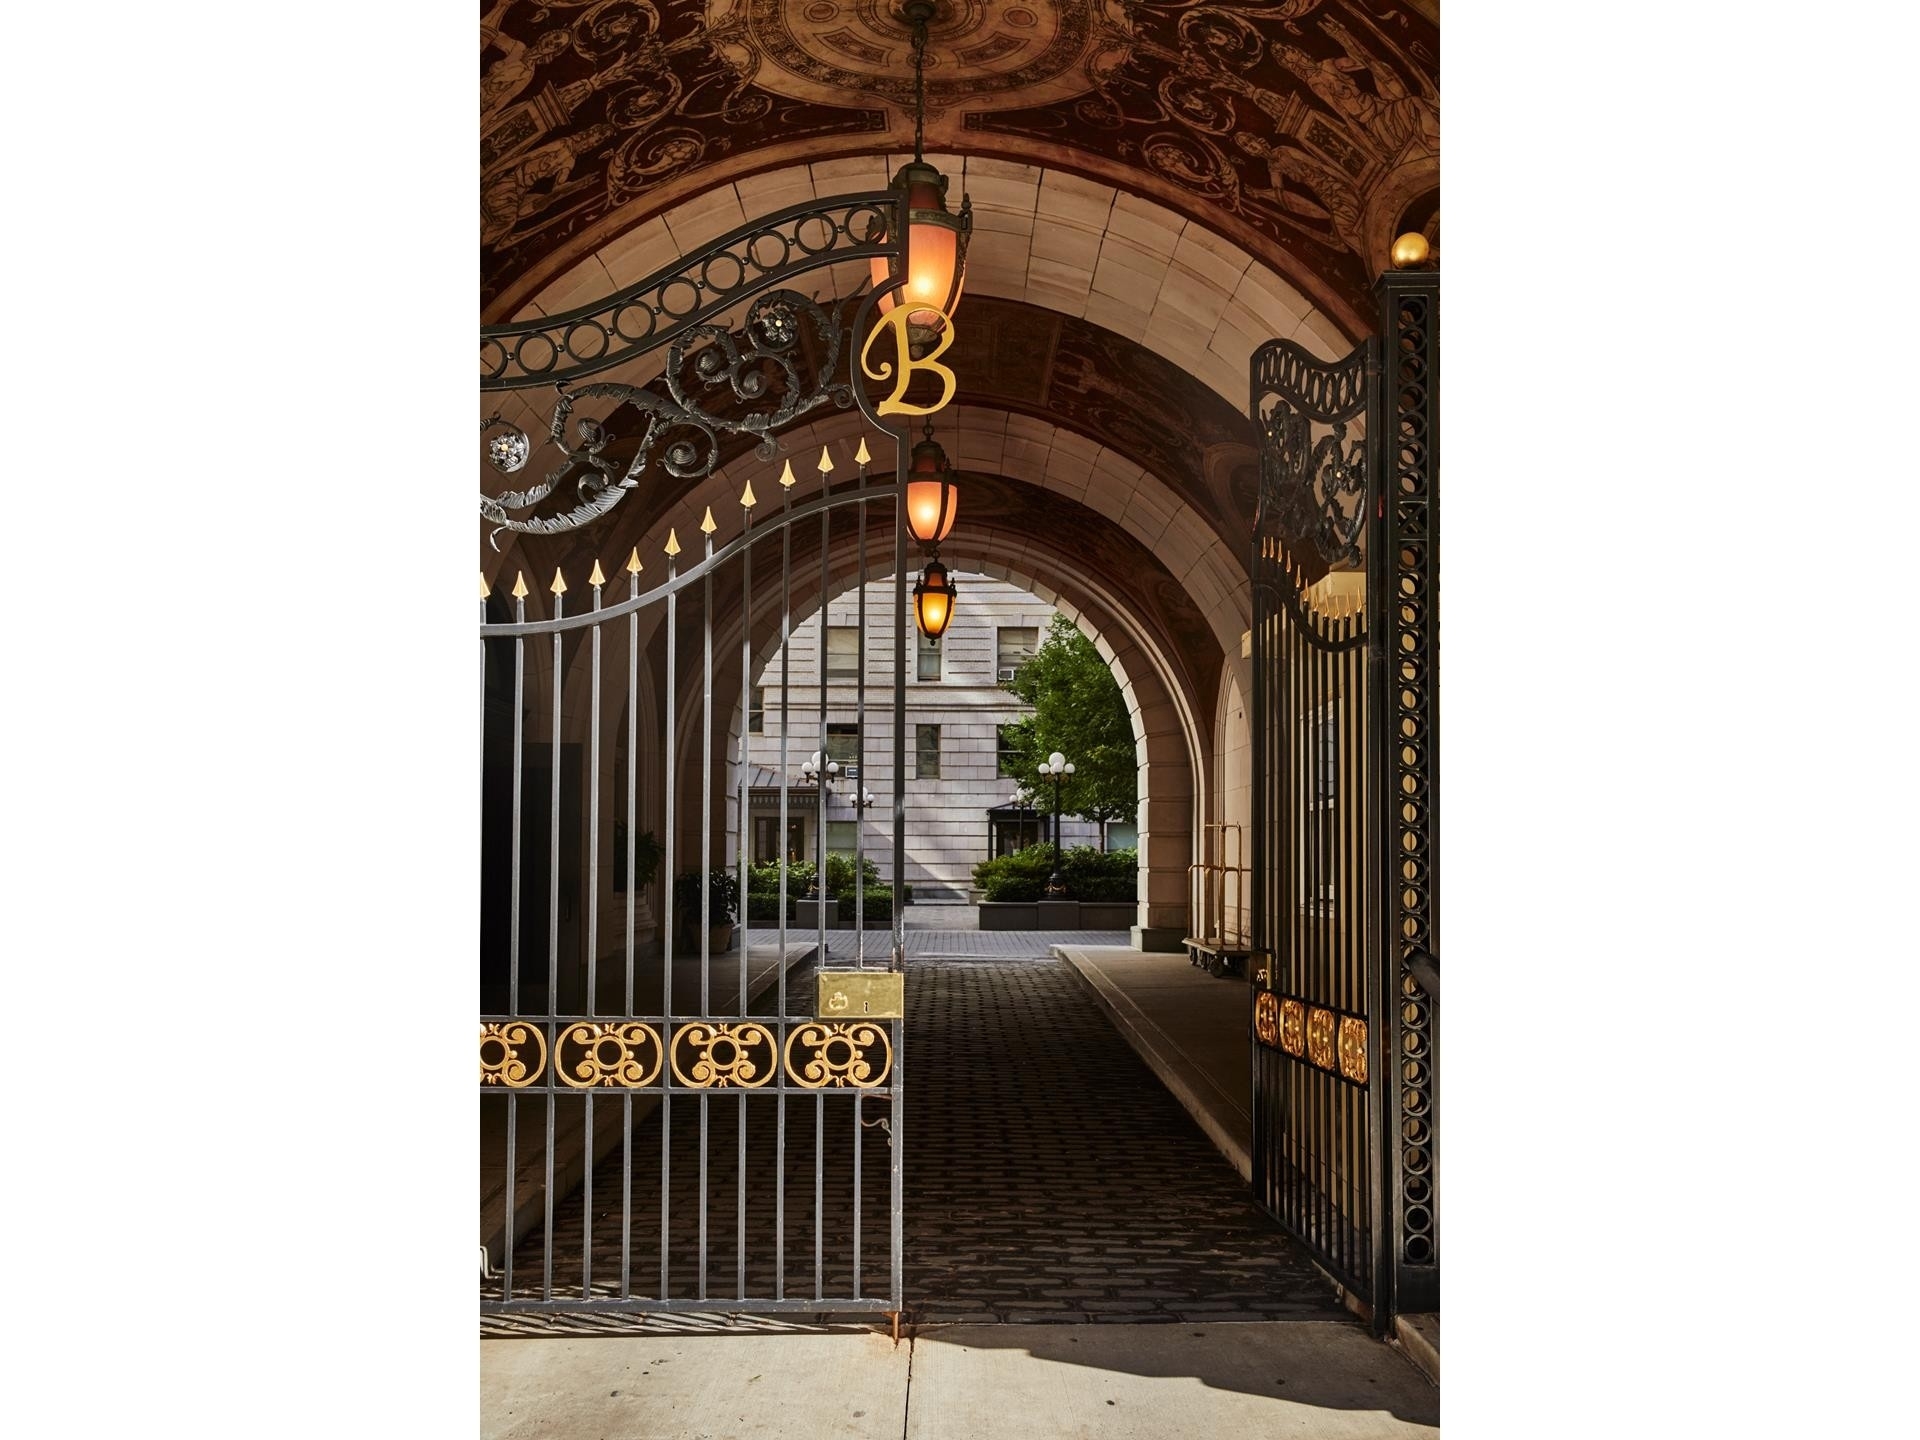 18. Condominiums for Sale at The Belnord, 225 W 86TH ST, 504 Upper West Side, New York, NY 10024